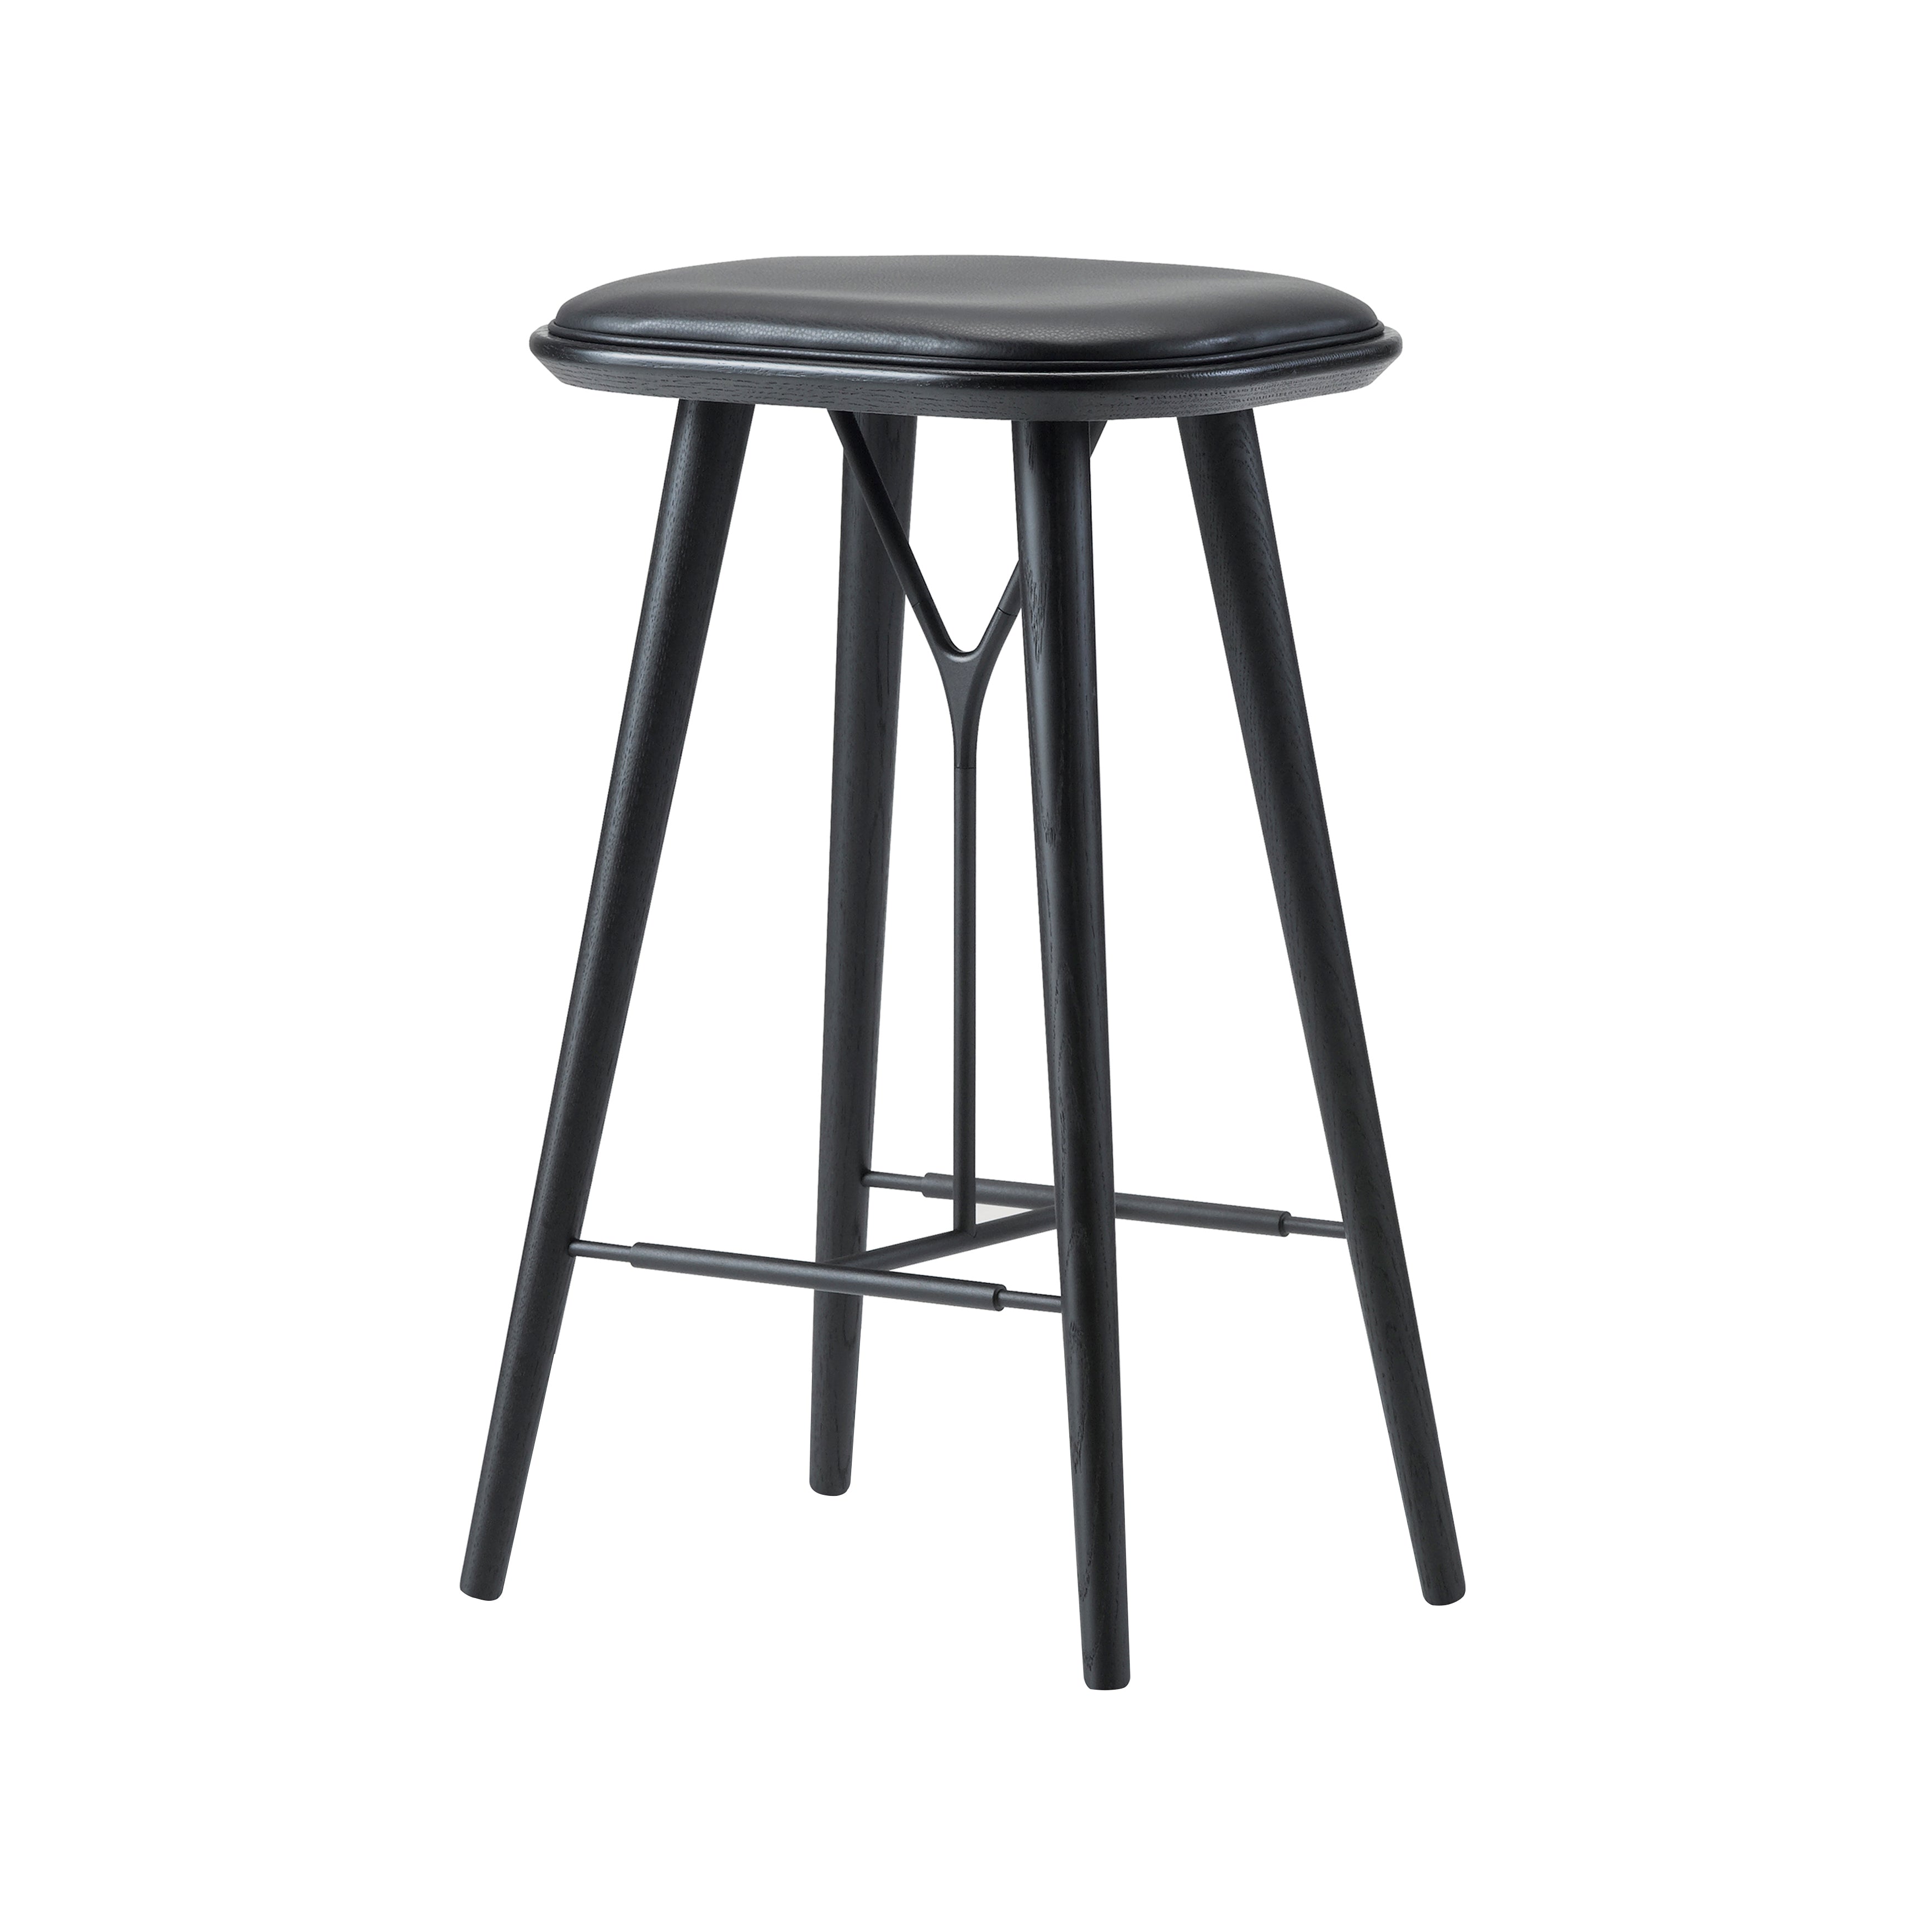 Spine Bar + Counter Stool: Wood Base + Counter + Black Lacquered Ash